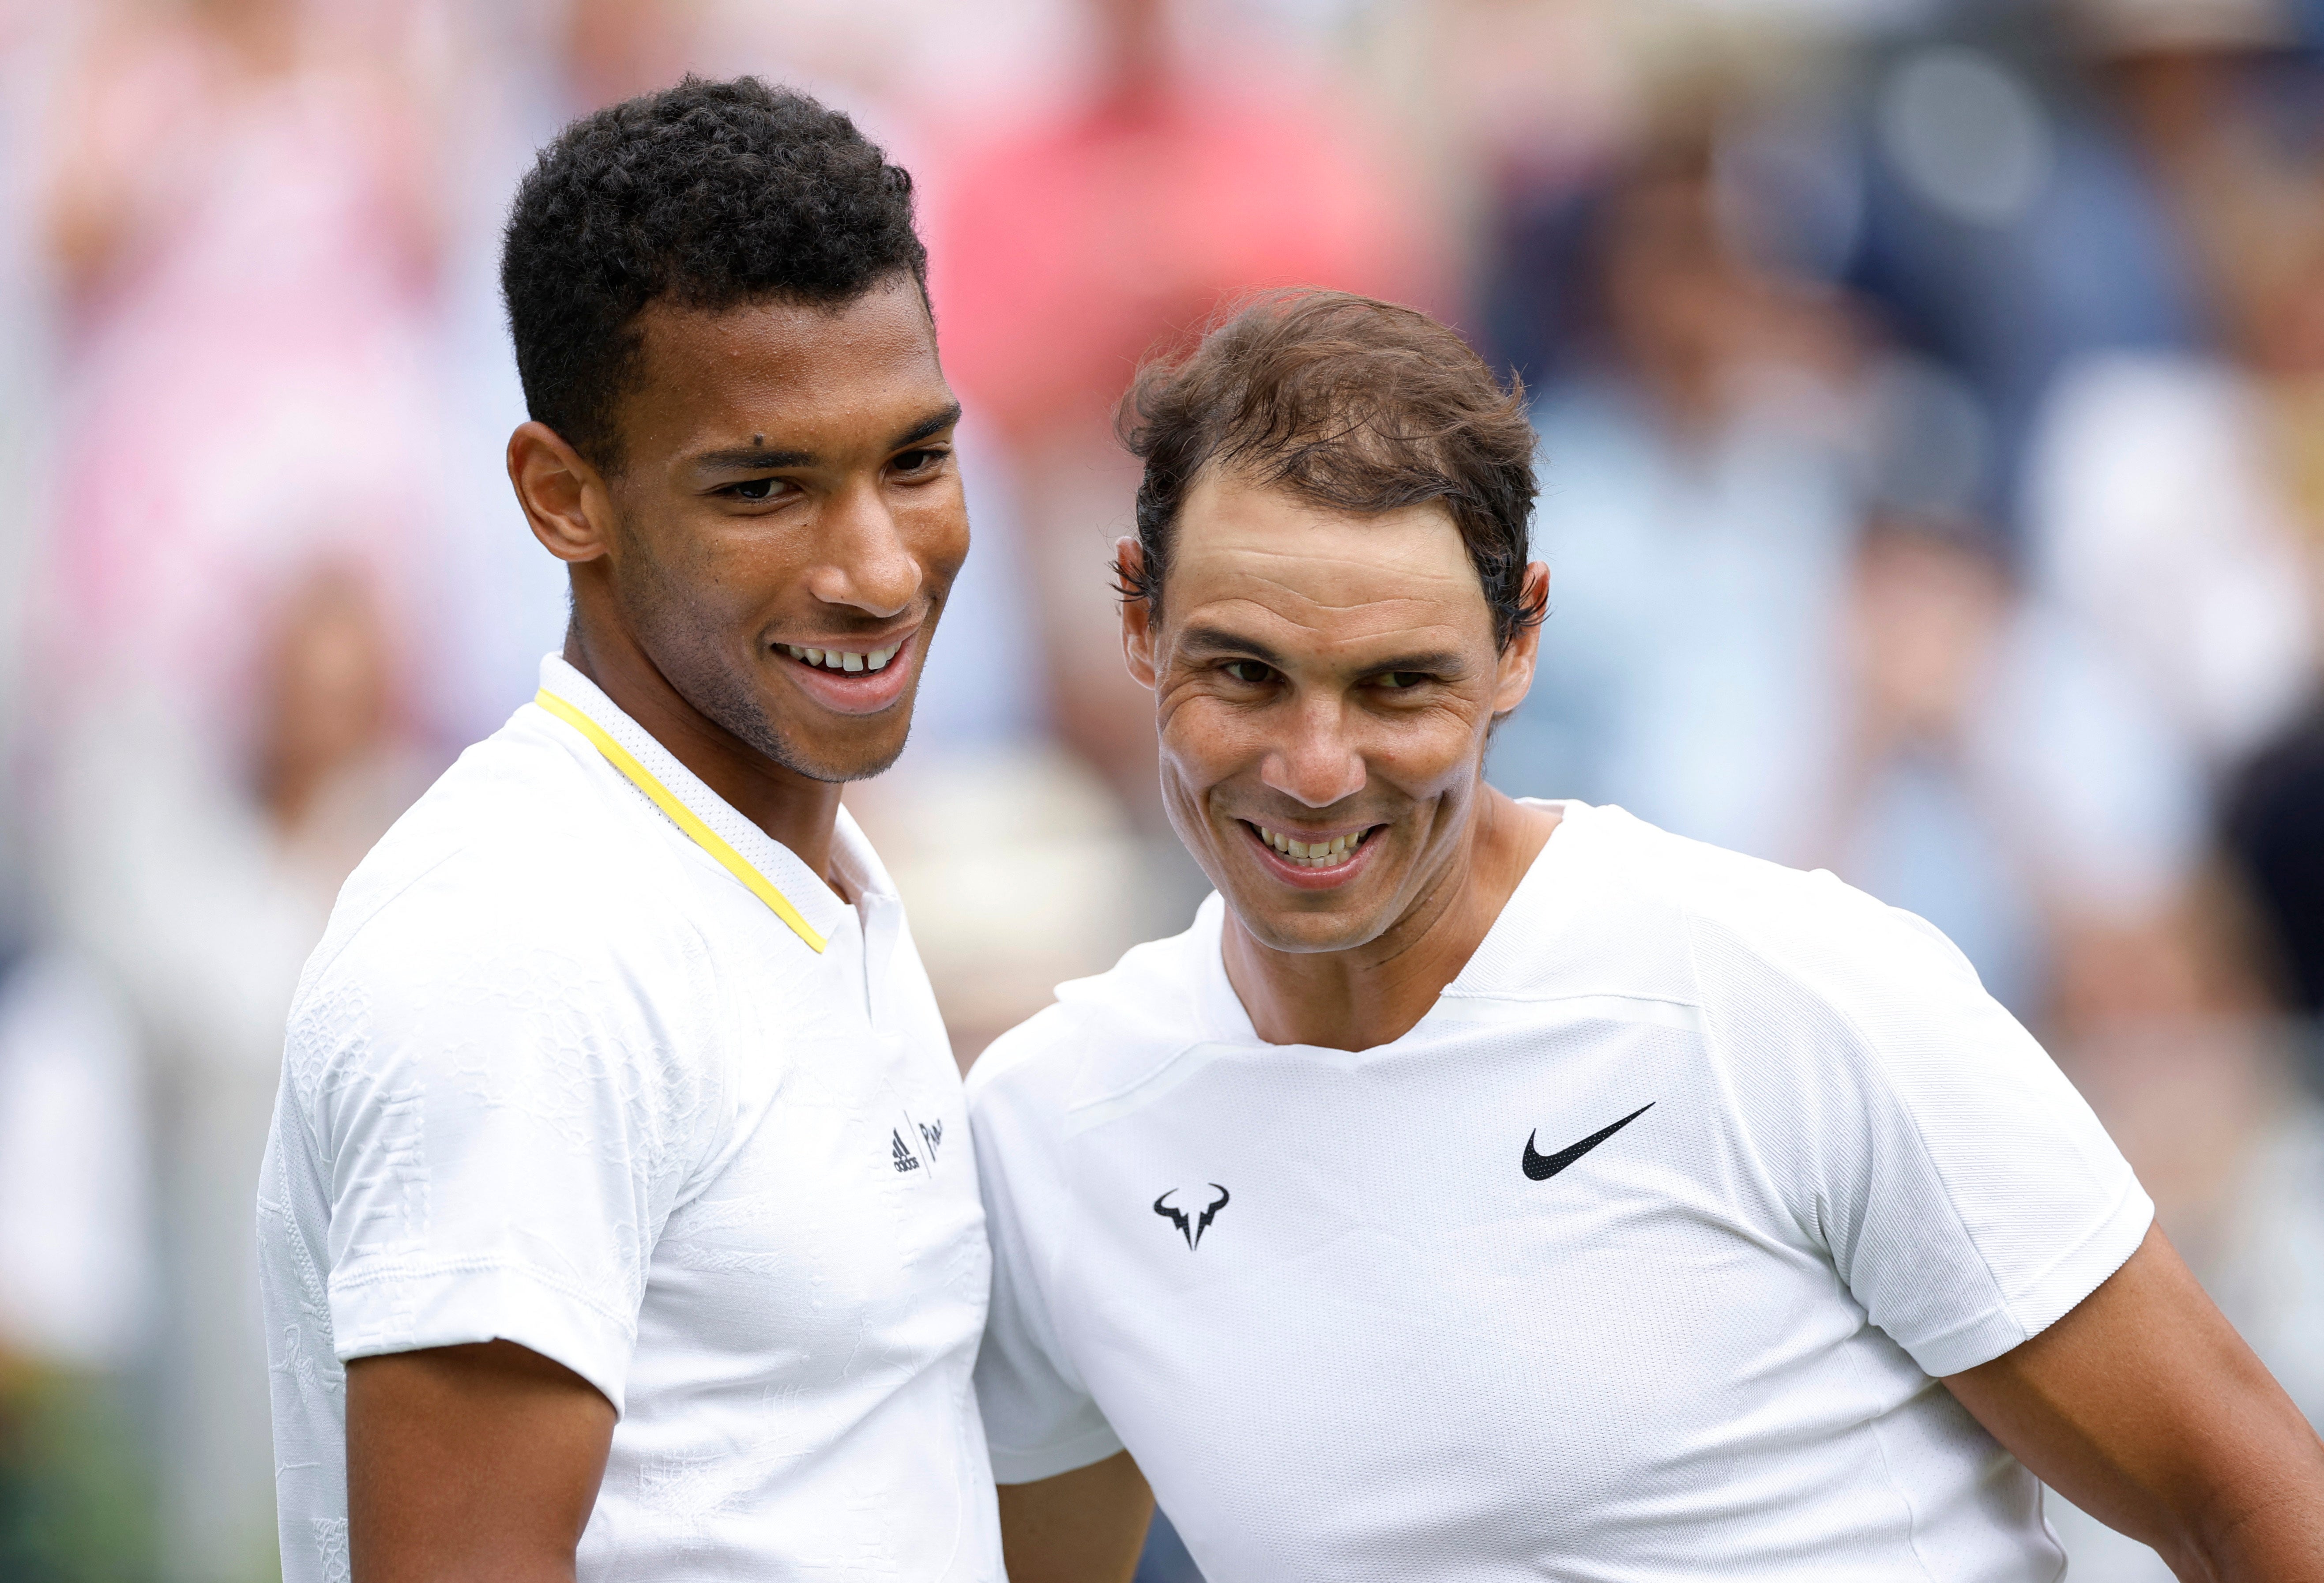 Rafael Nadal vs Felix Auger-Aliassime LIVE Tennis result from Hurlingham Club as Nadal loses The Independent